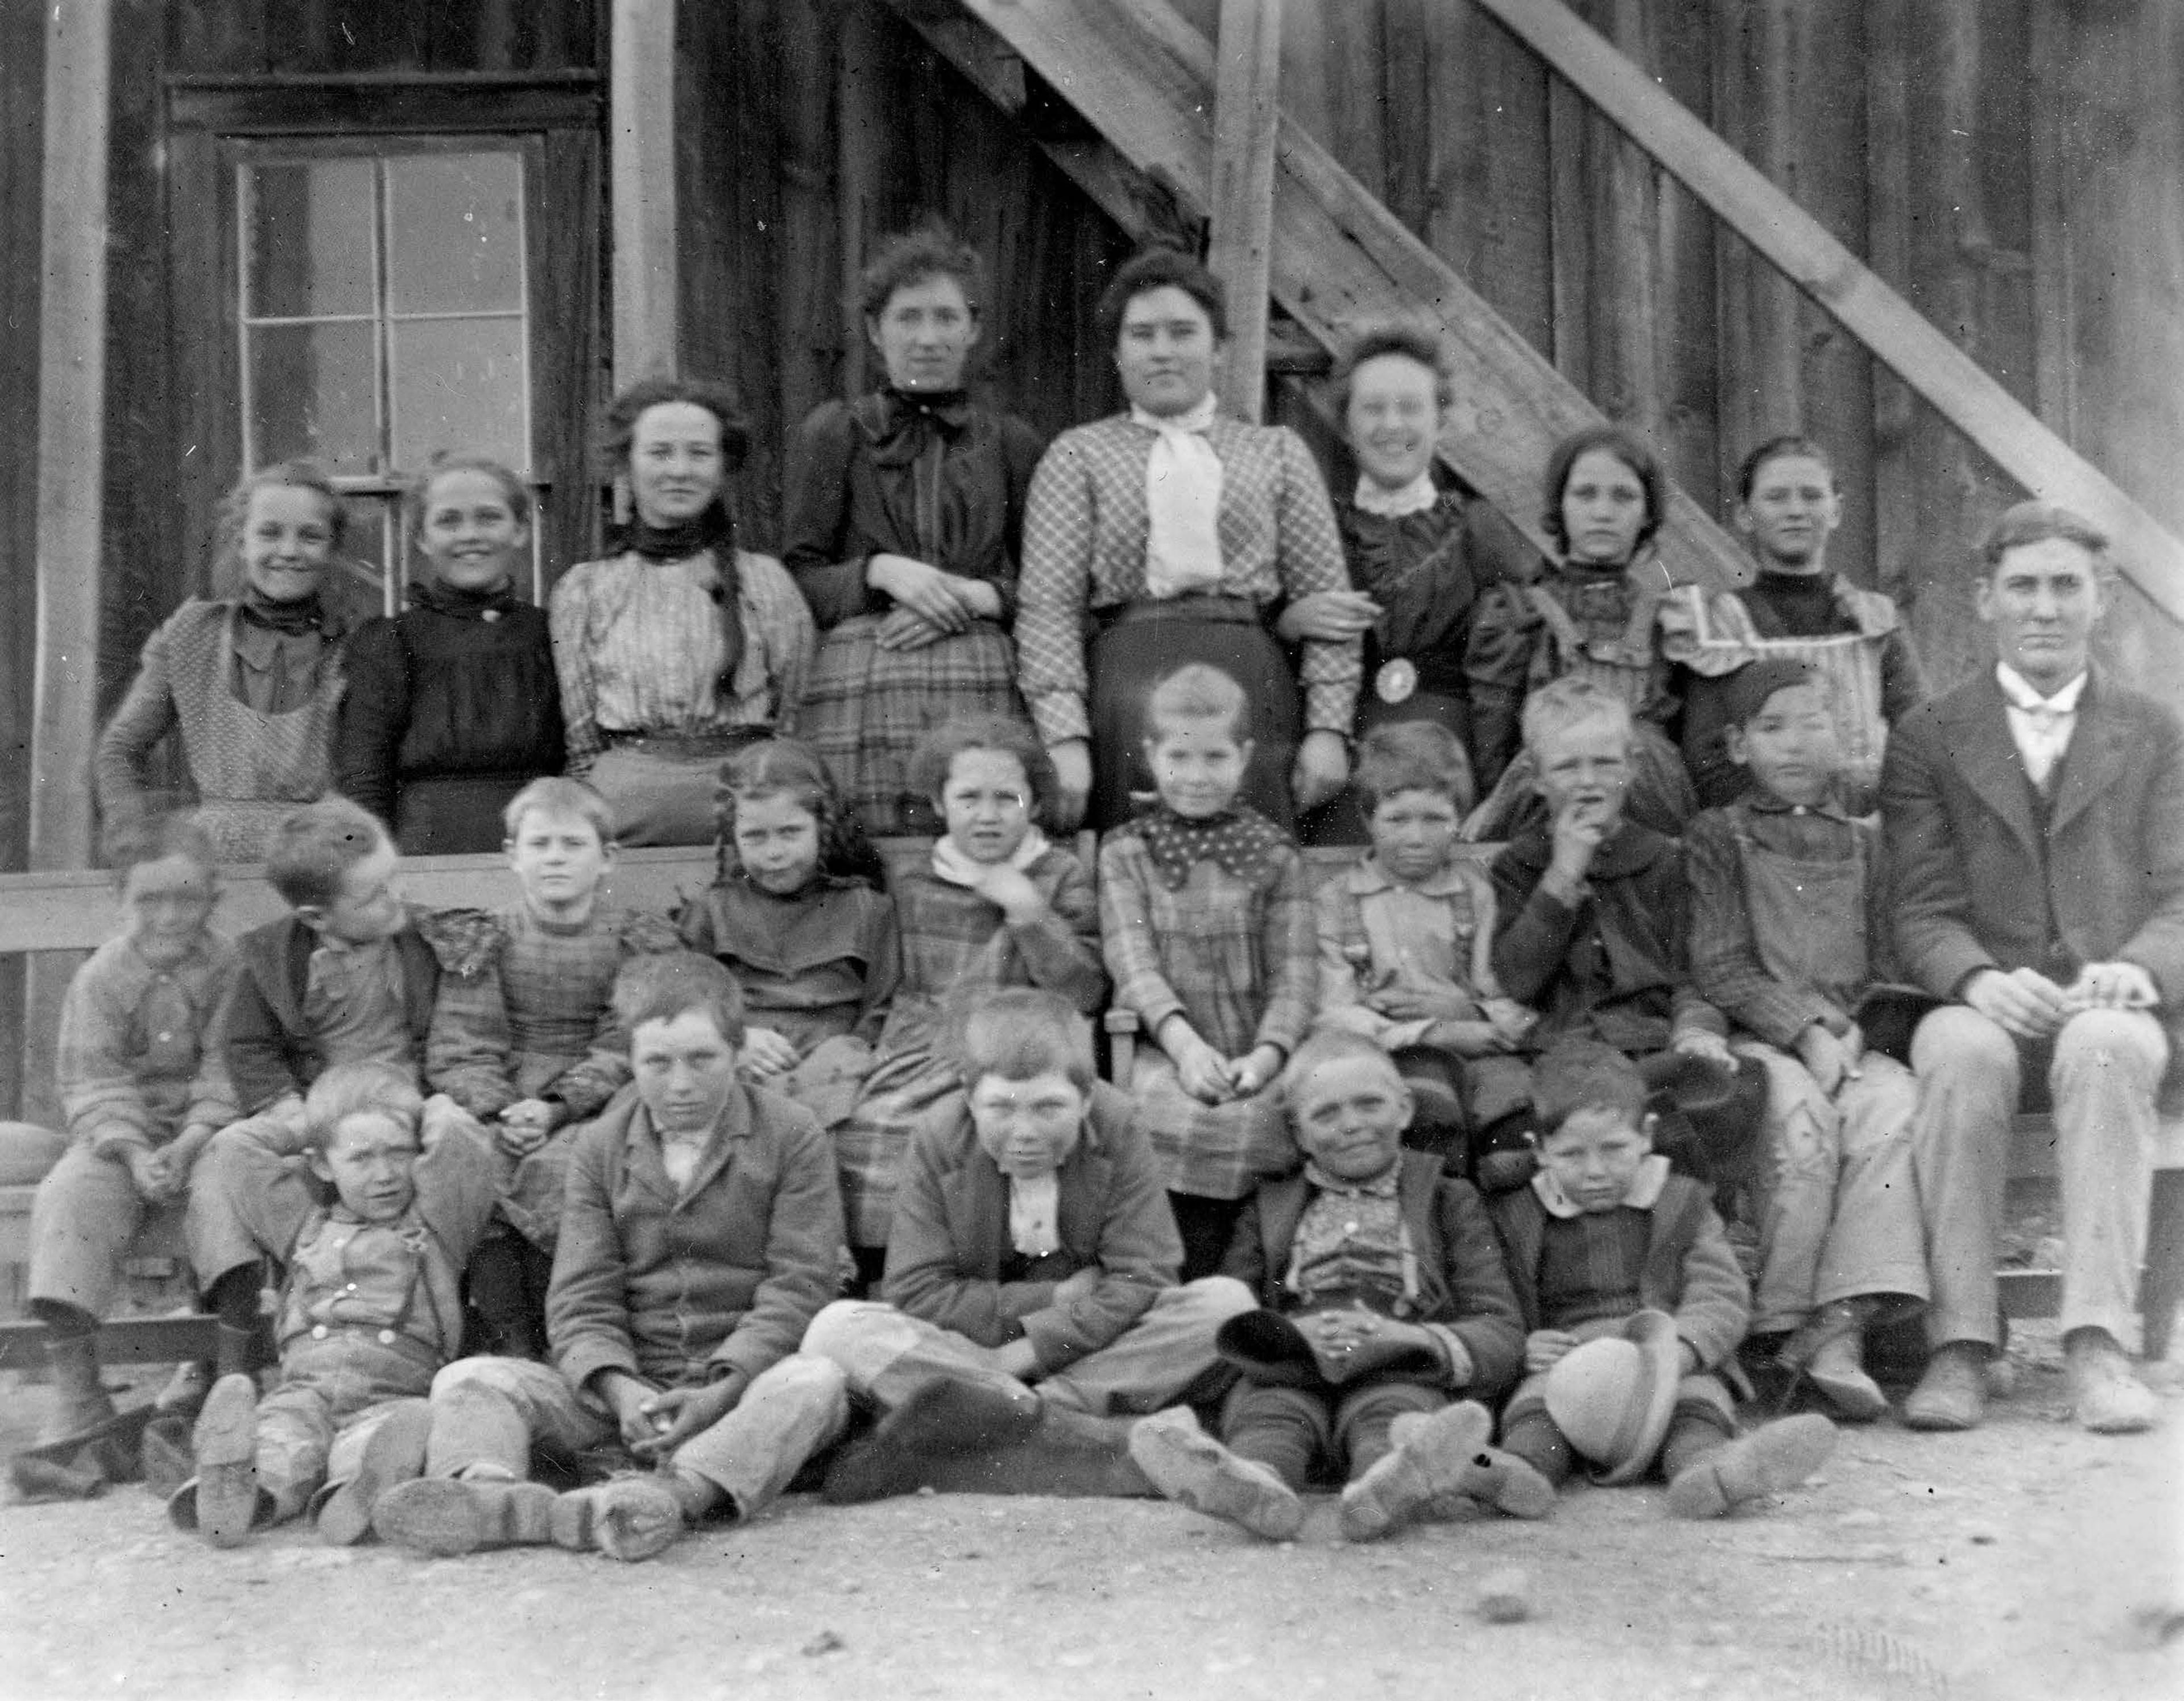 This is the class and one-room schoolhouse classroom which my maternal grandfather, Harvey, taught in the early part of the 20th century. Harvey is on the far right.